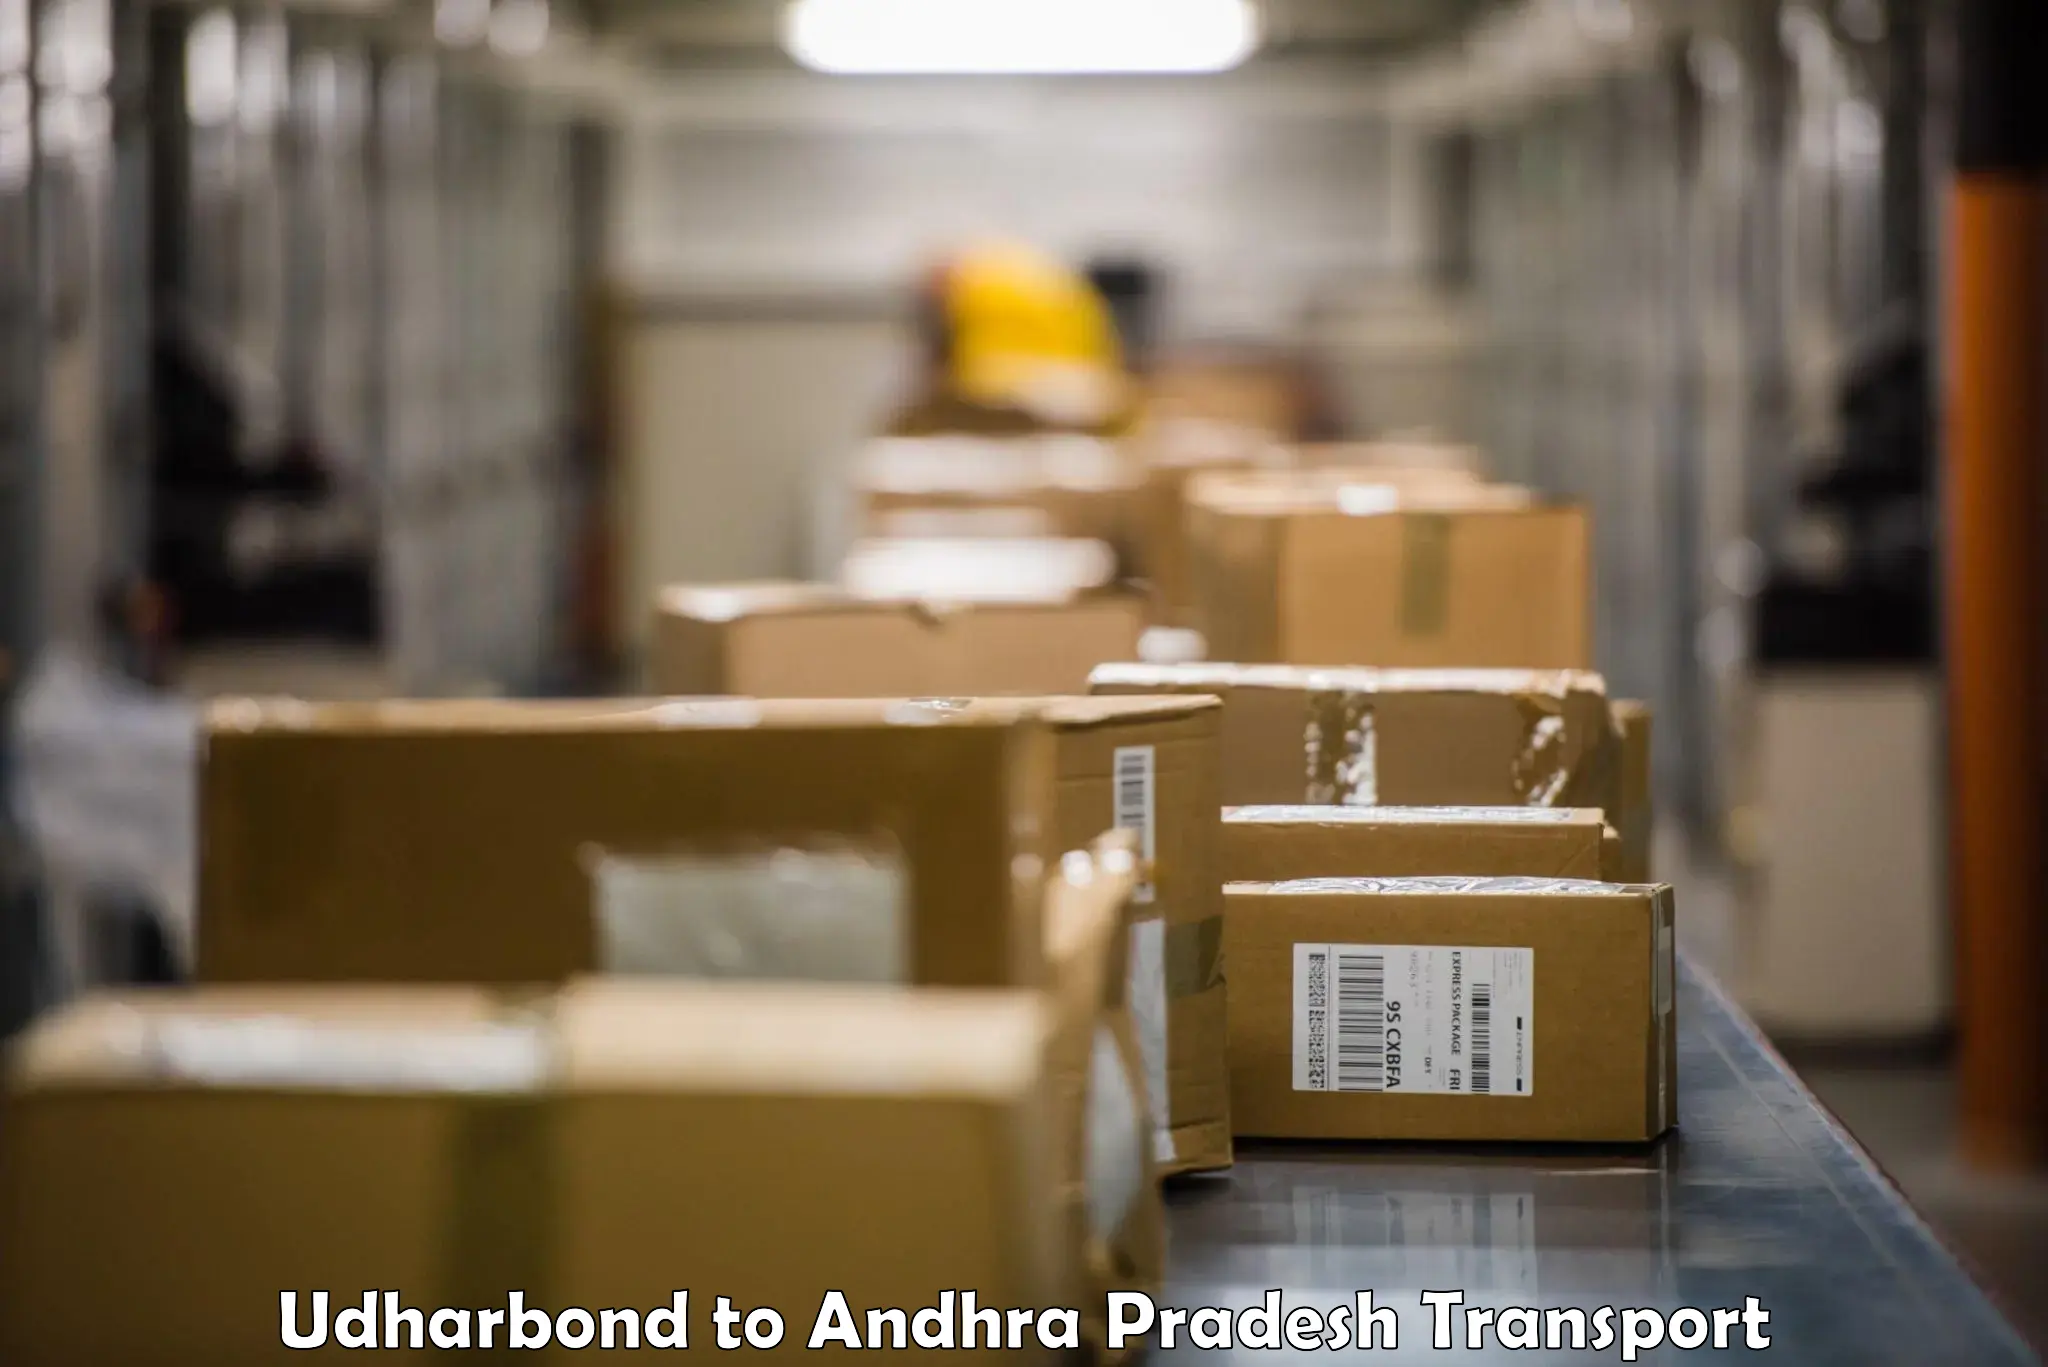 Truck transport companies in India Udharbond to Chandragiri